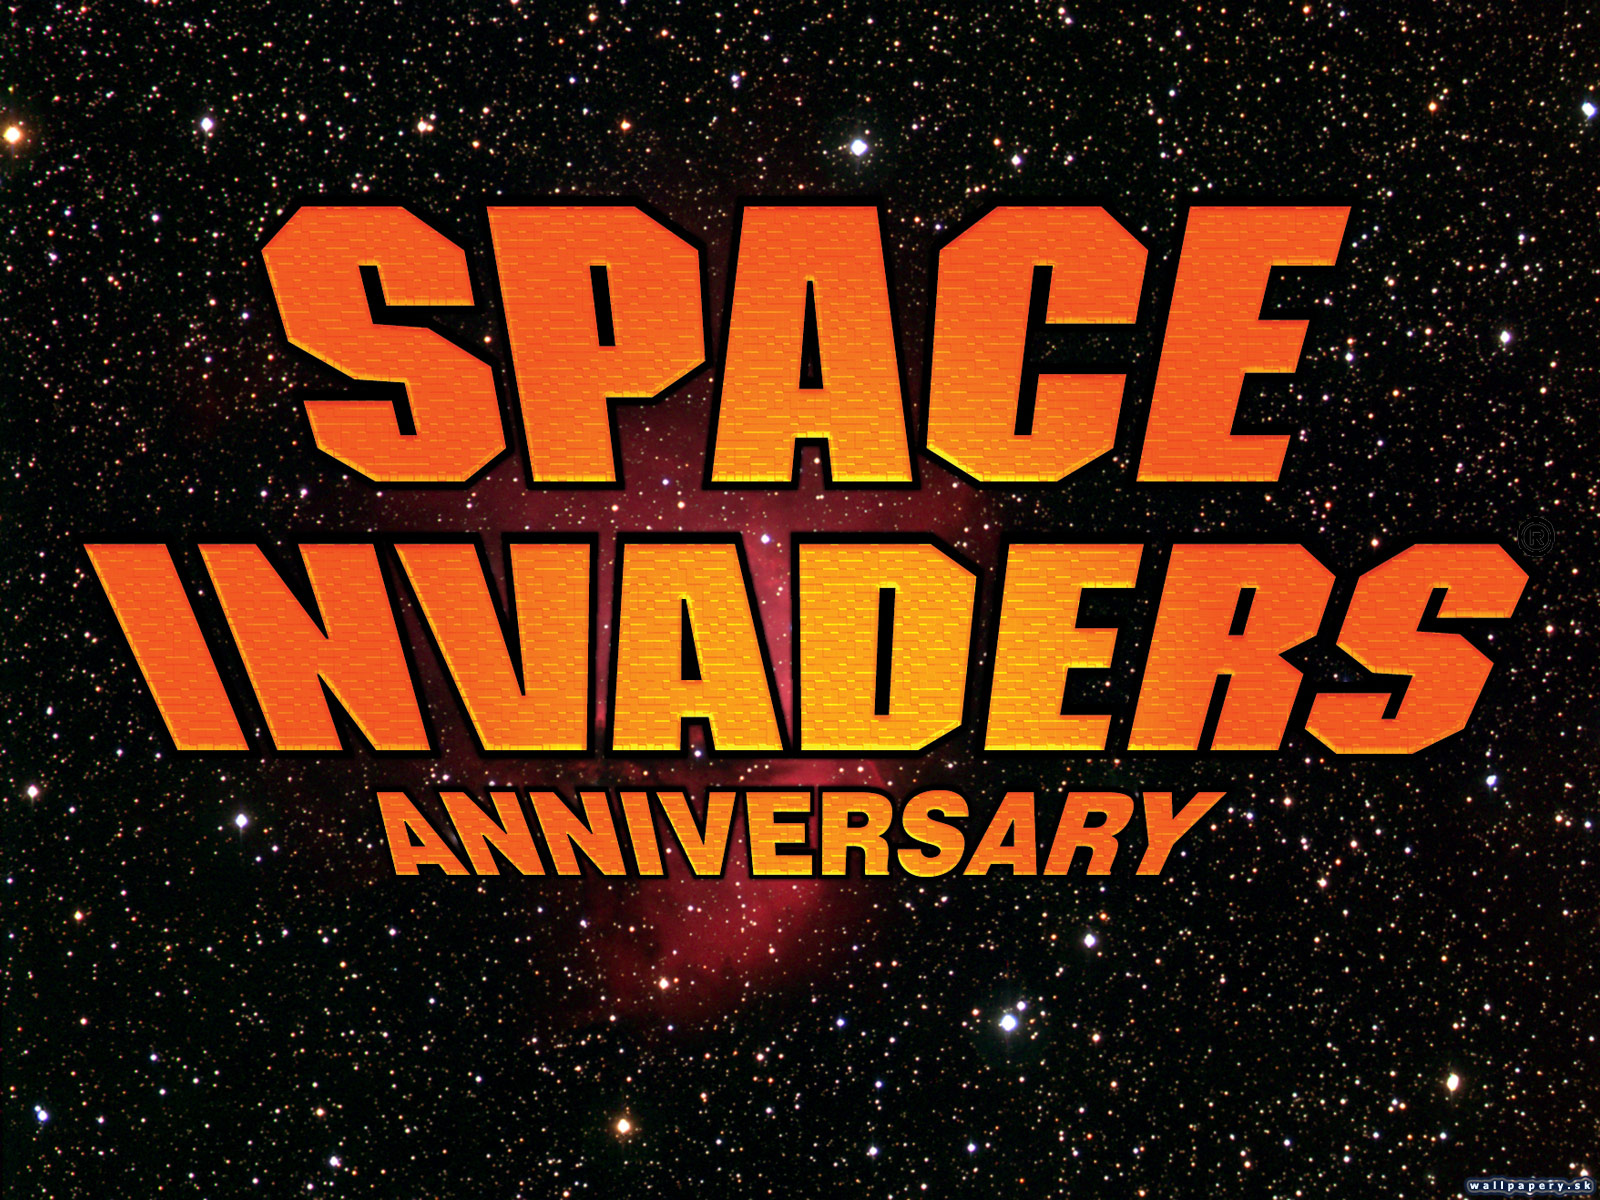 Space Invaders Anniversary - wallpaper 3